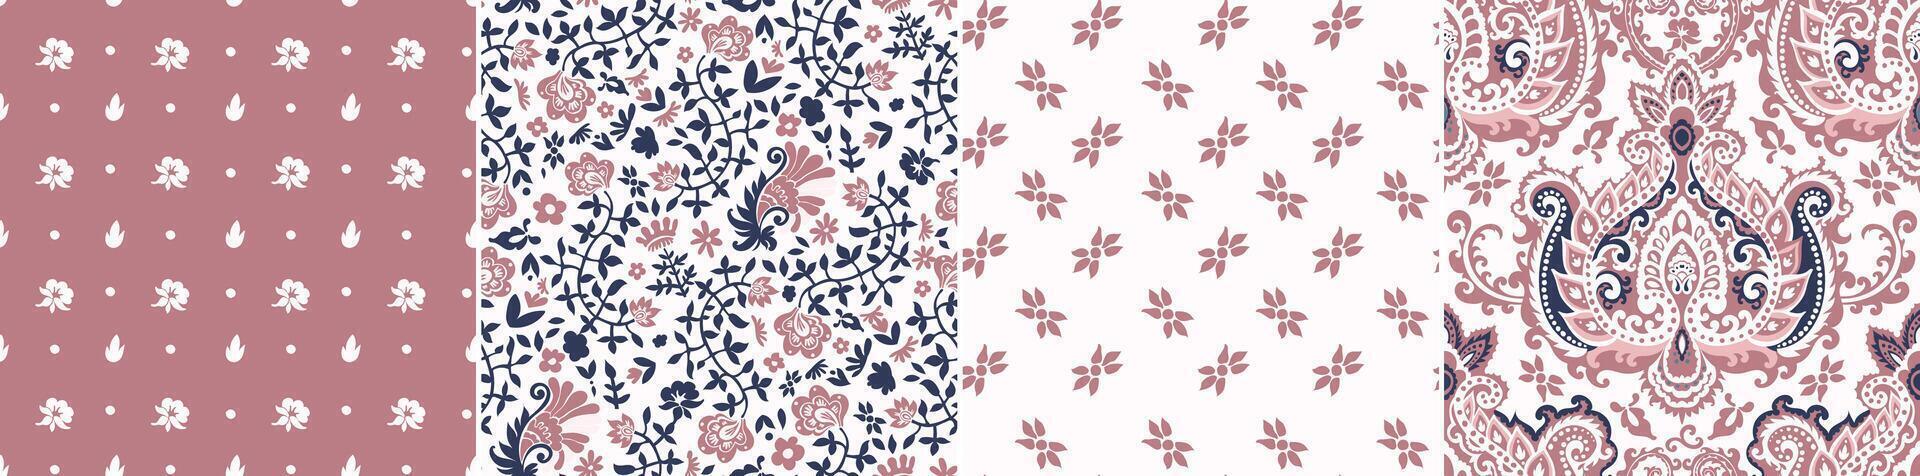 Collection of Damask floral motifs vector